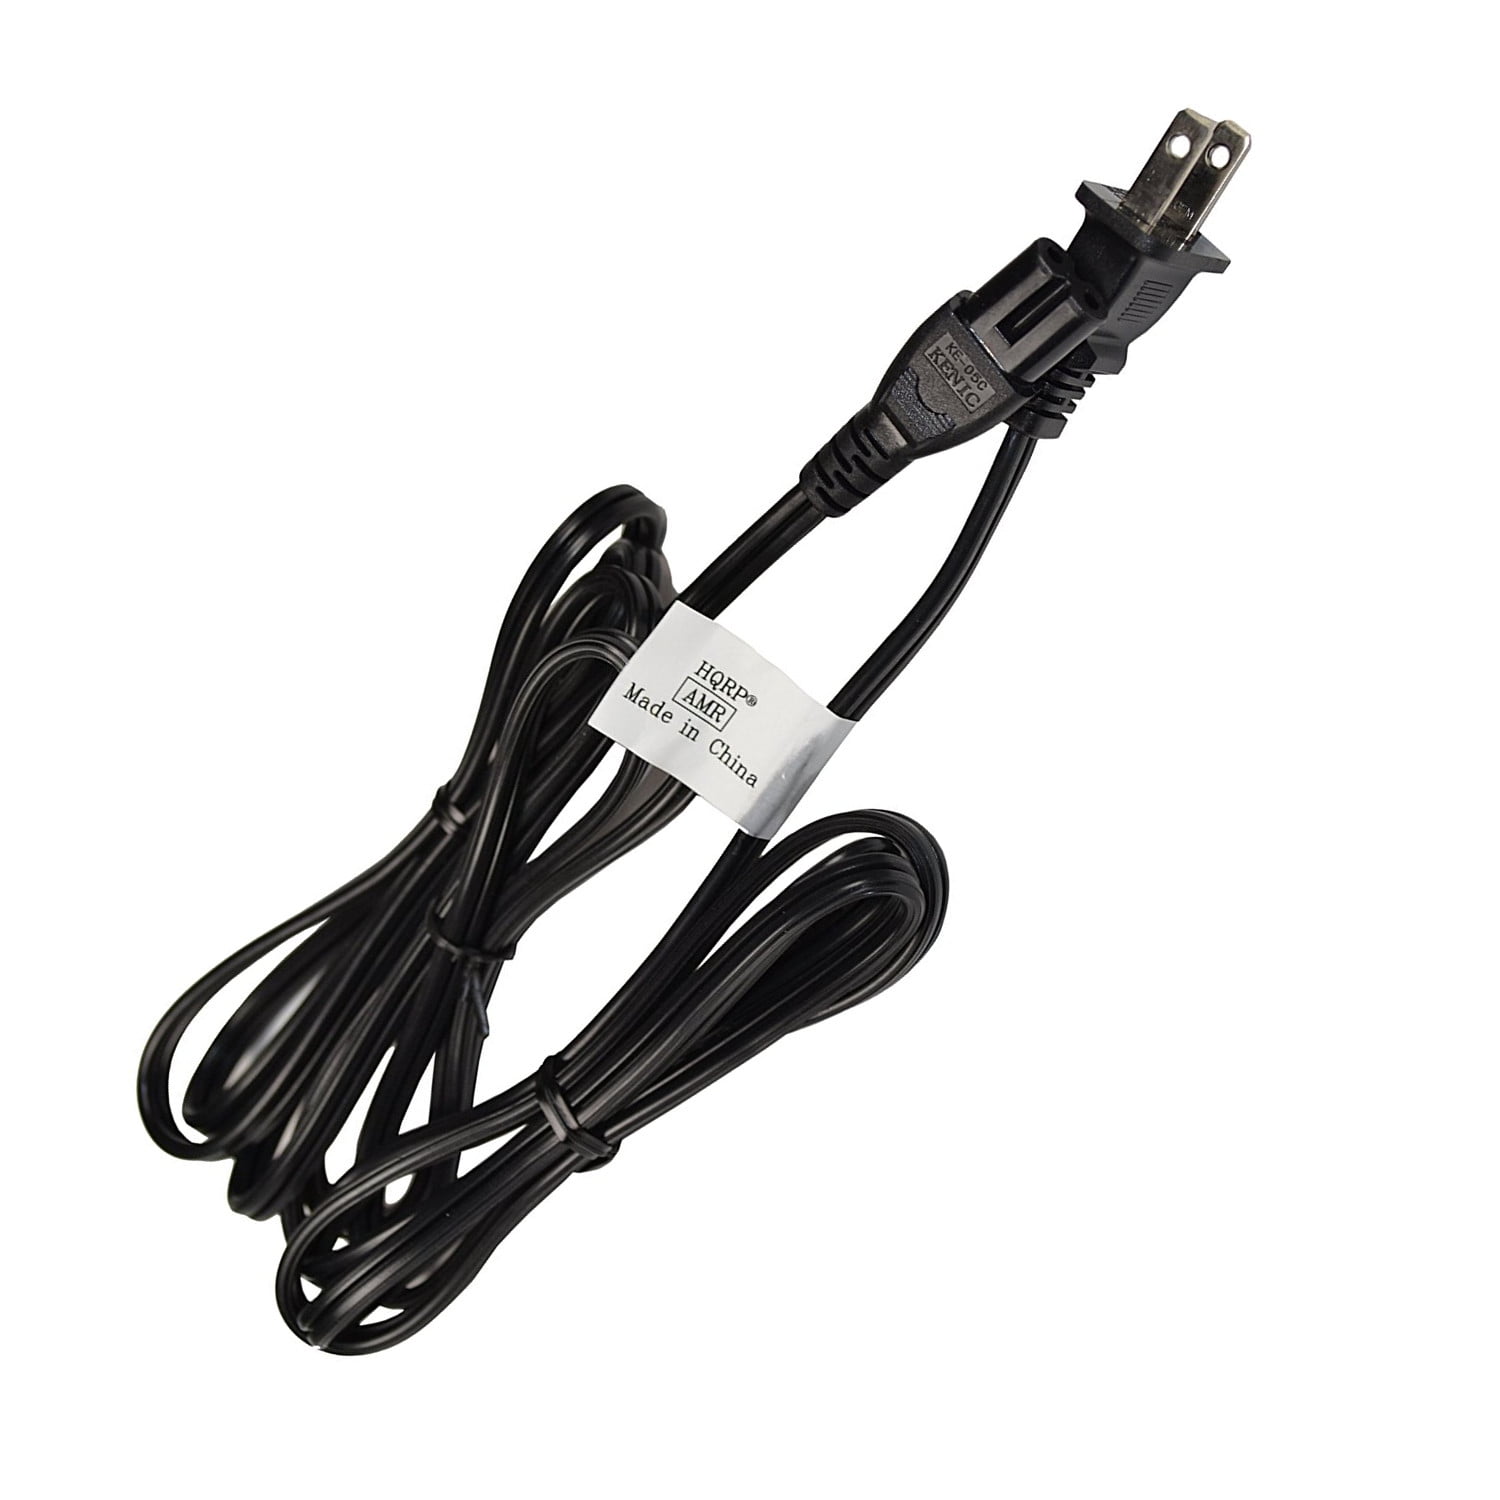 HQRP 5ft AC Power Cord for LG LF6100 50LF6100 55LF6100 60LF6100 Mains Cable Plus HQRP Coaster 